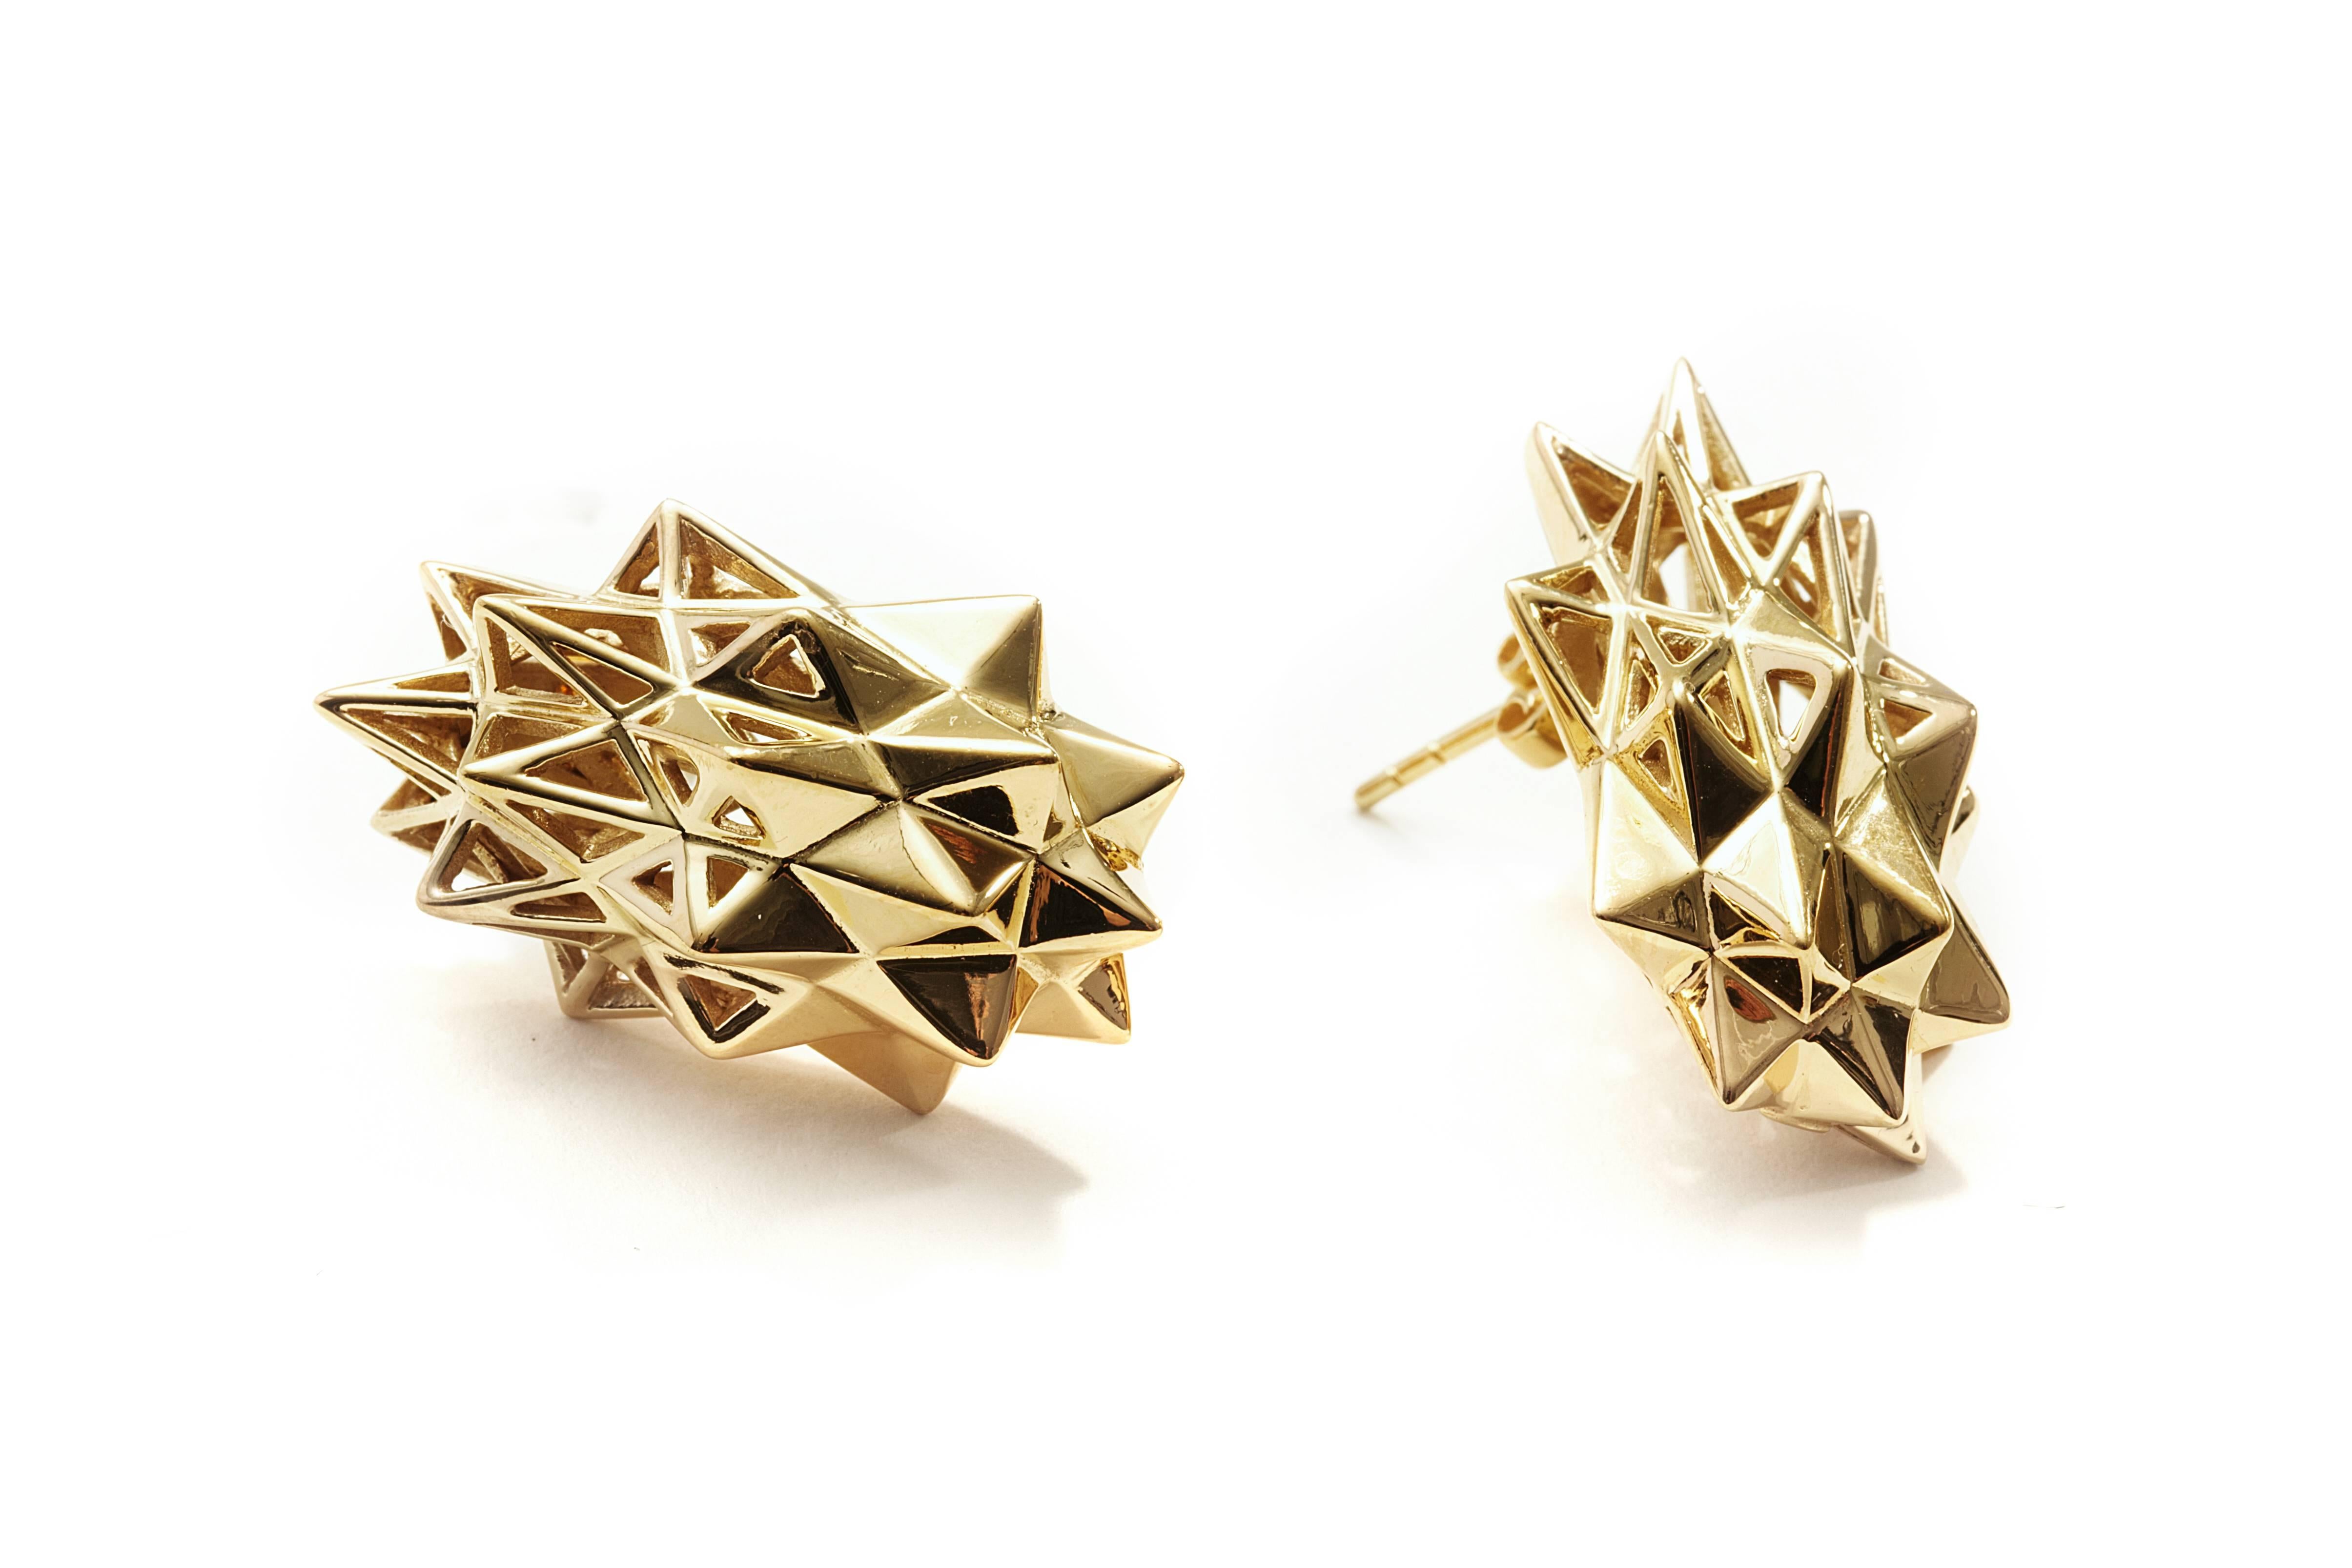 These limited edition, Stellated 18K Gold Stud Earrings are an embodiment of monumental power and strength. These earrings feature sacred geometric forms. This piece's shield-like design mixed with the sacred geometrical form was designed to evoke